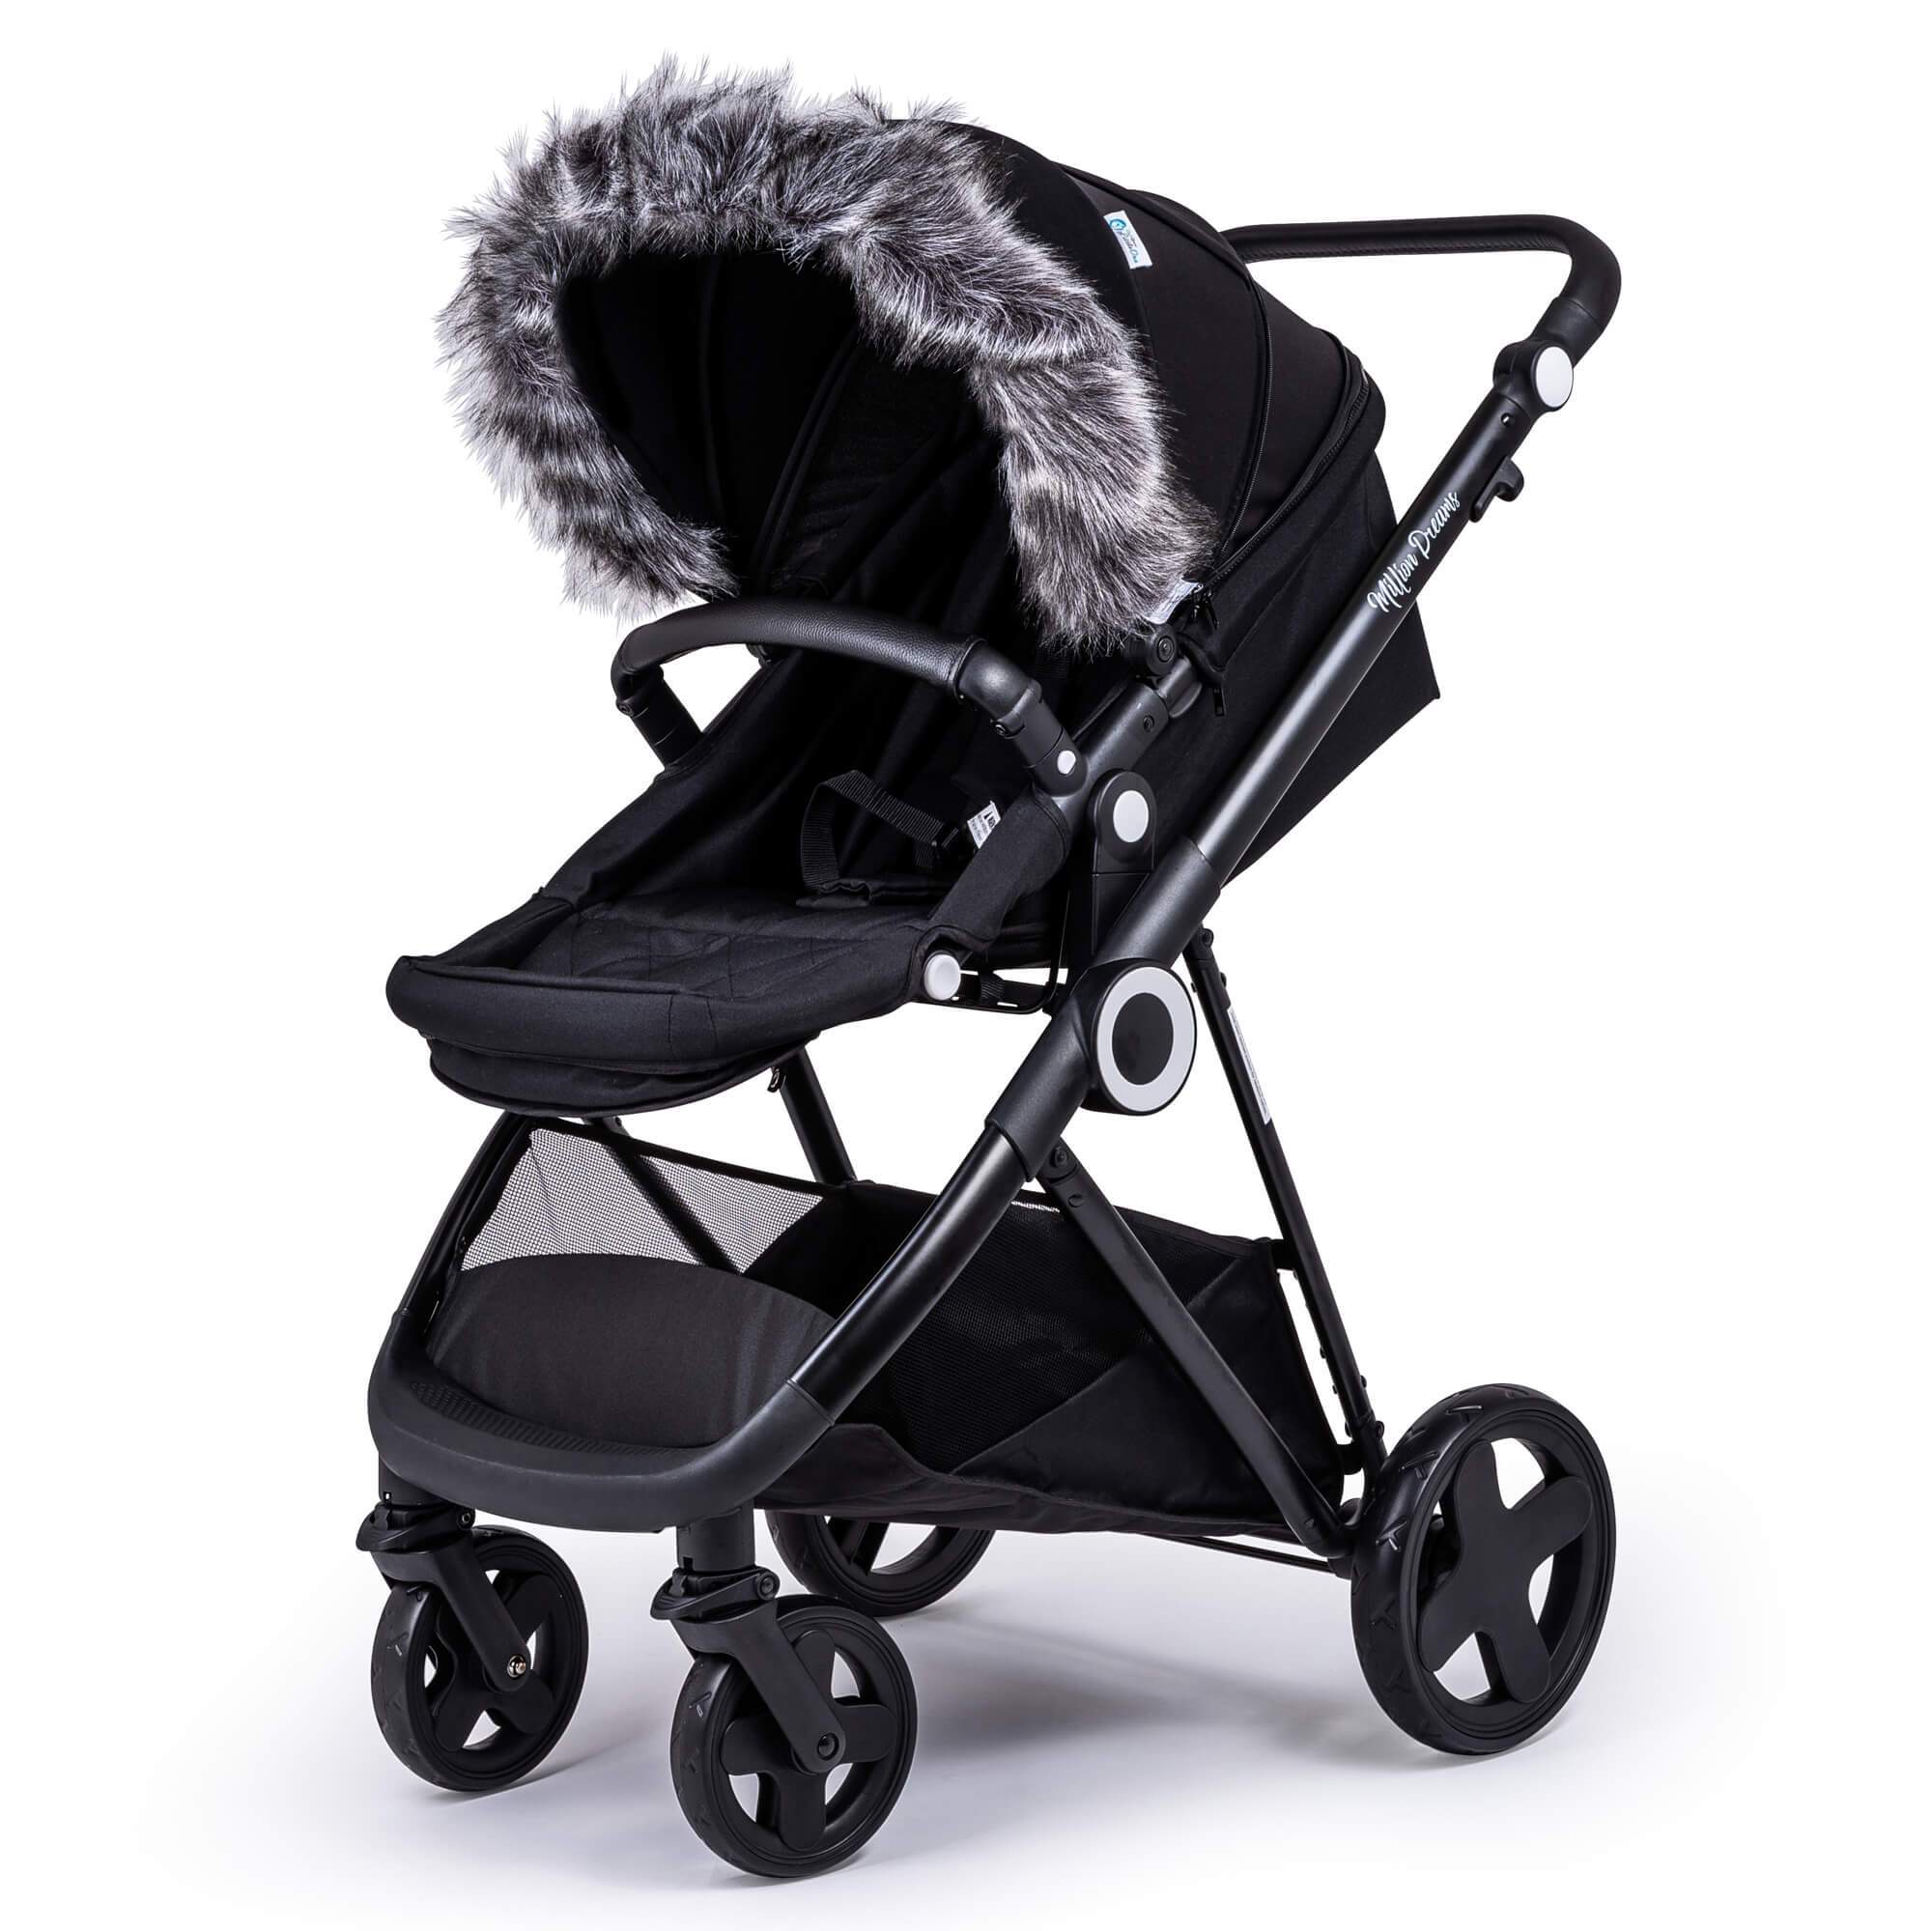 Pram Fur Hood Trim Attachment for Pushchair Compatible with Silver Cross - Dark Grey / Fits All Models | For Your Little One